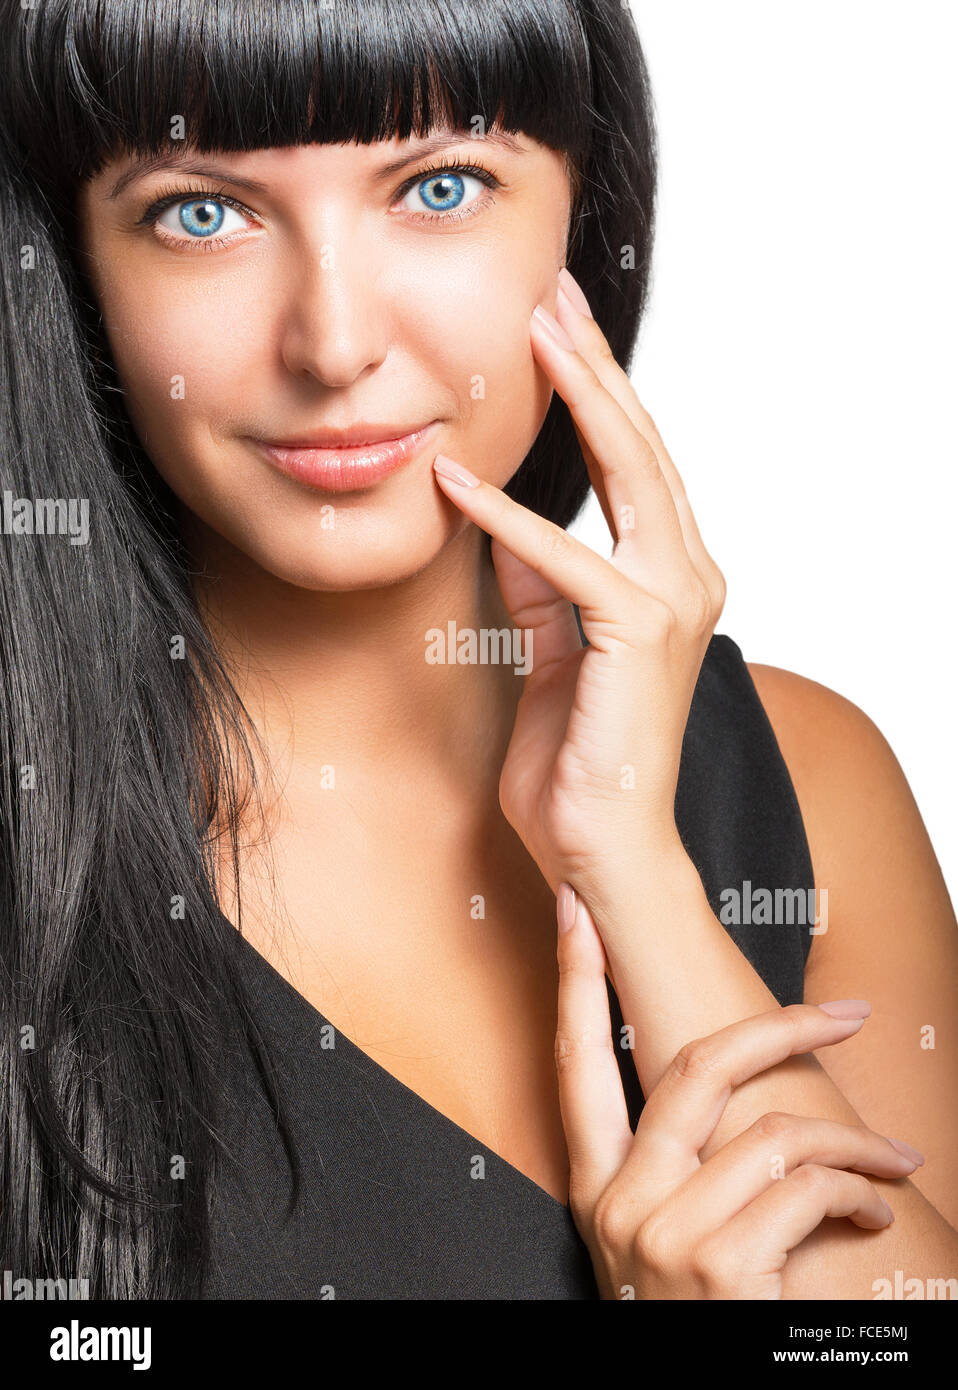 Portrait of a beautiful young woman on a white background Stock Photo